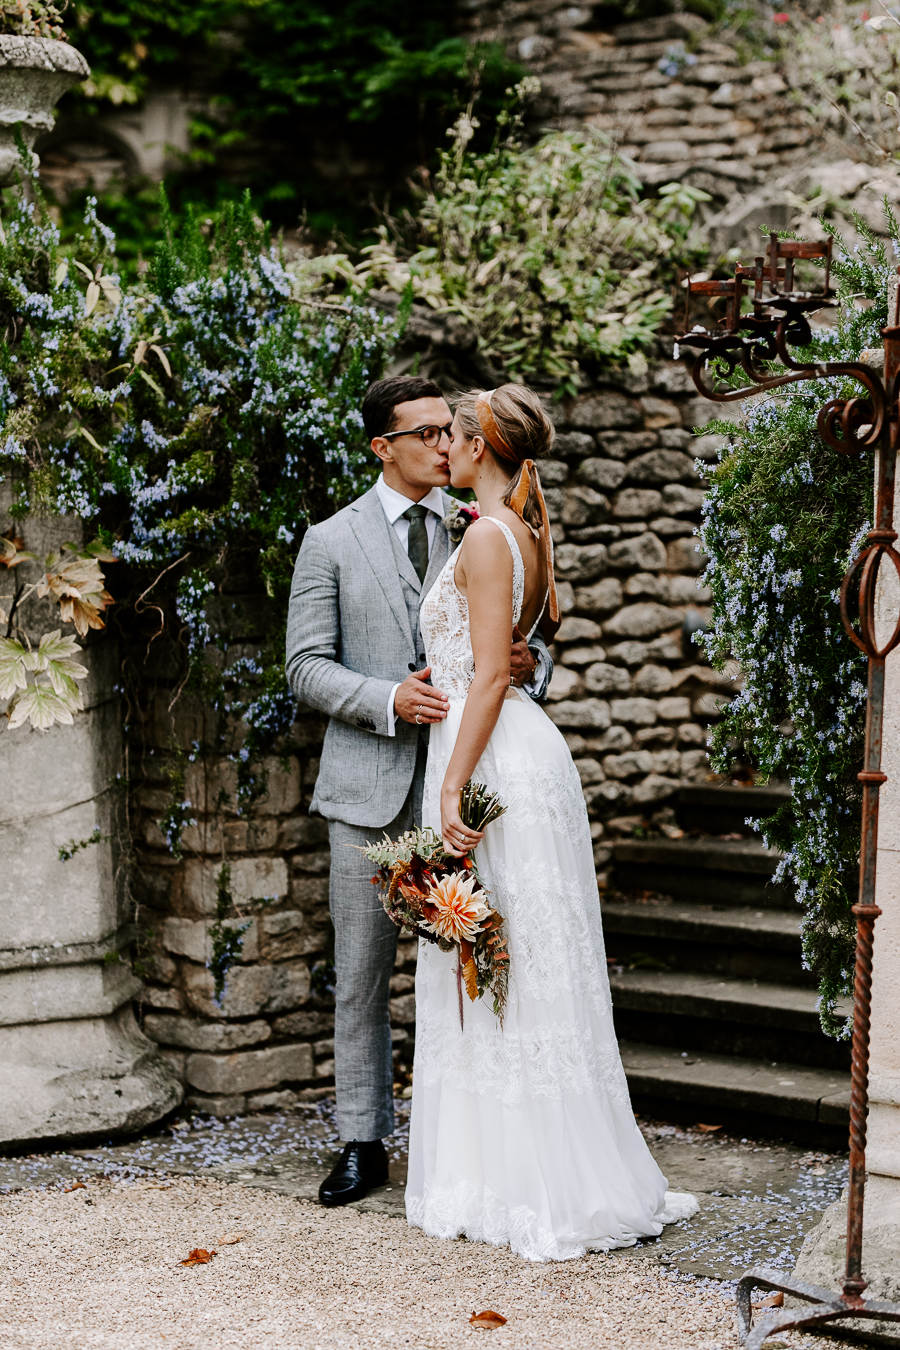 A magical wiltshire wedding venue - the Lost Orangery with Sam Cook Photography (29)